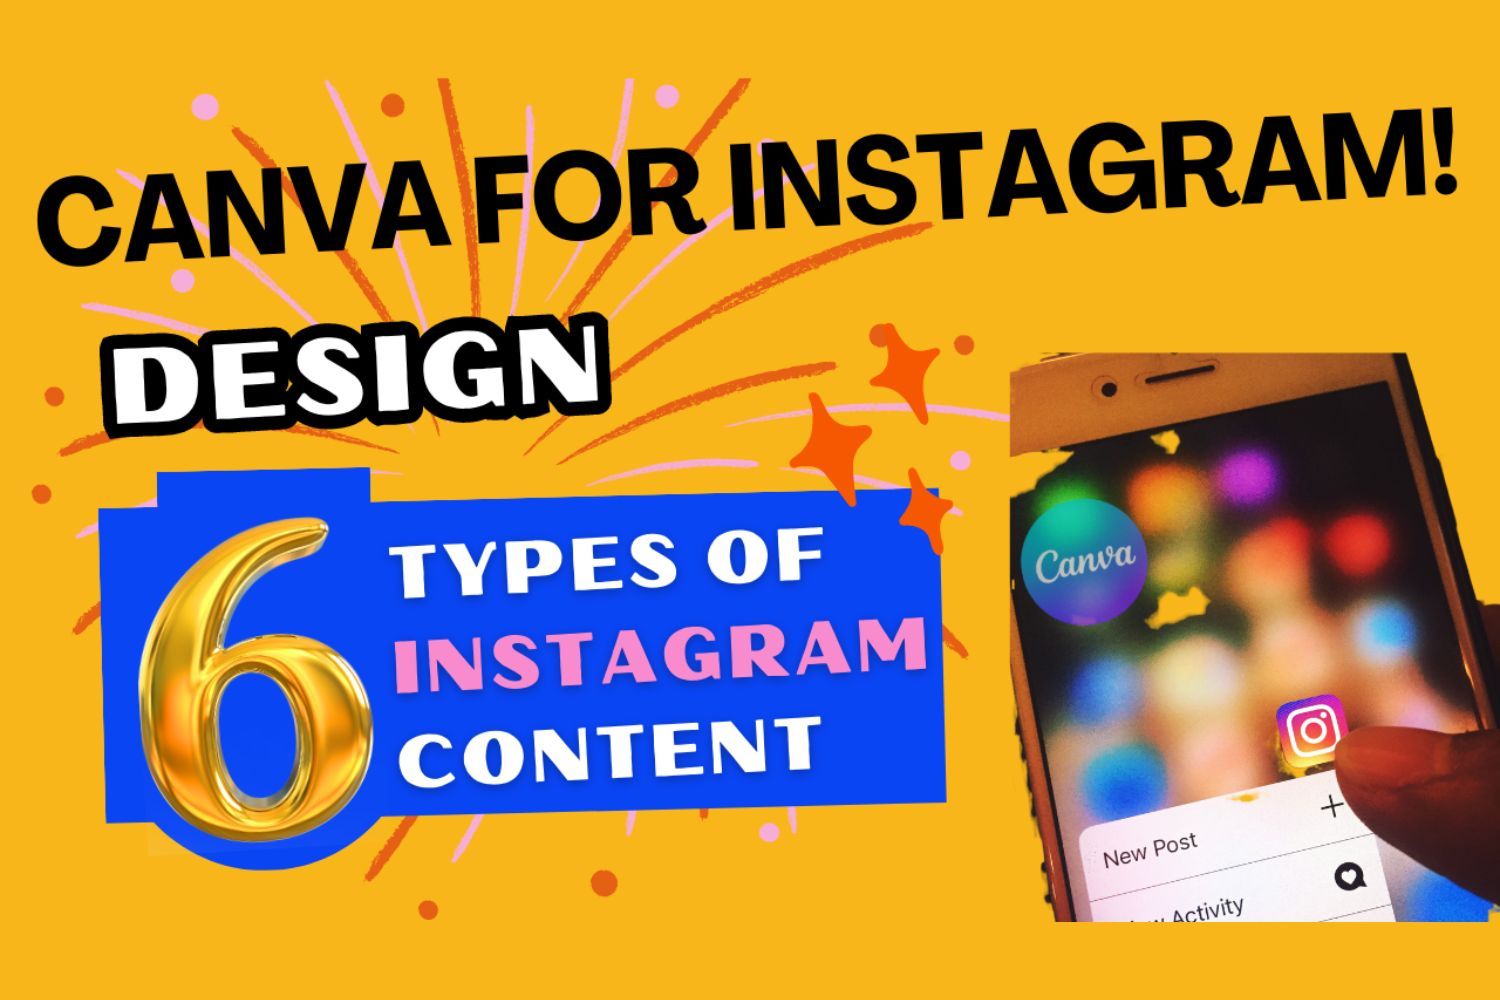 Canva For Instagram: A Guide To Create 6 Types Of Instagram Content In ...